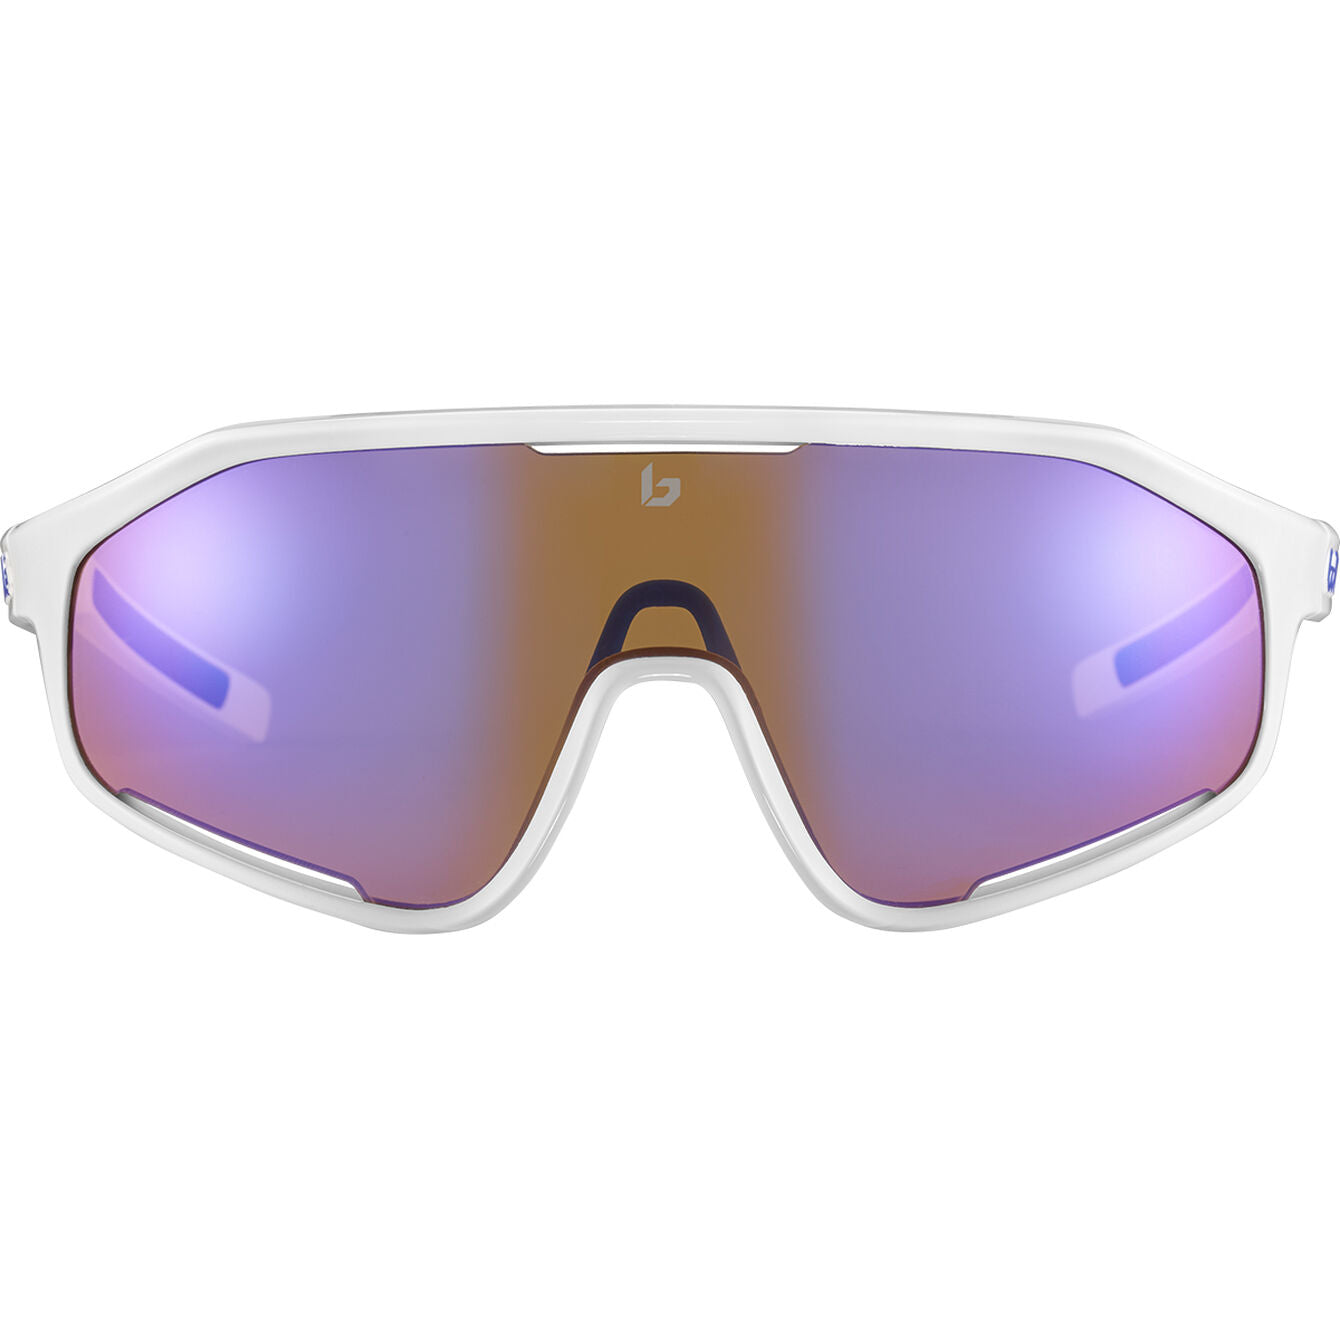 Bolle SHIFTER BS010006 Sunglasses - White Shiny - Brown Blue